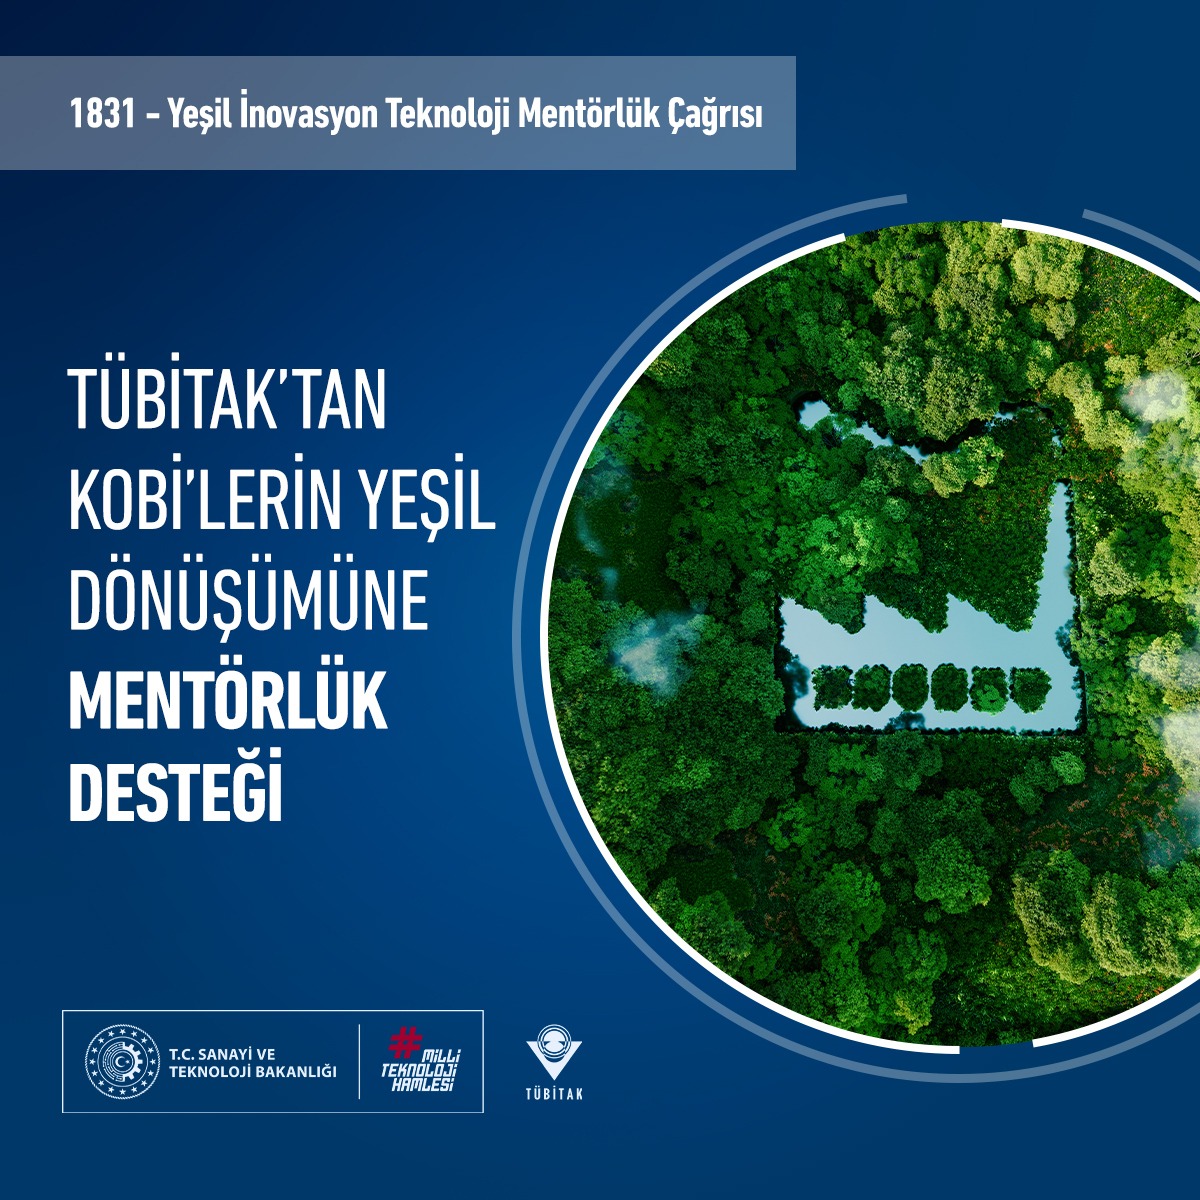 TUBITAK Supports Mentoring for SMEs' Green Transformation